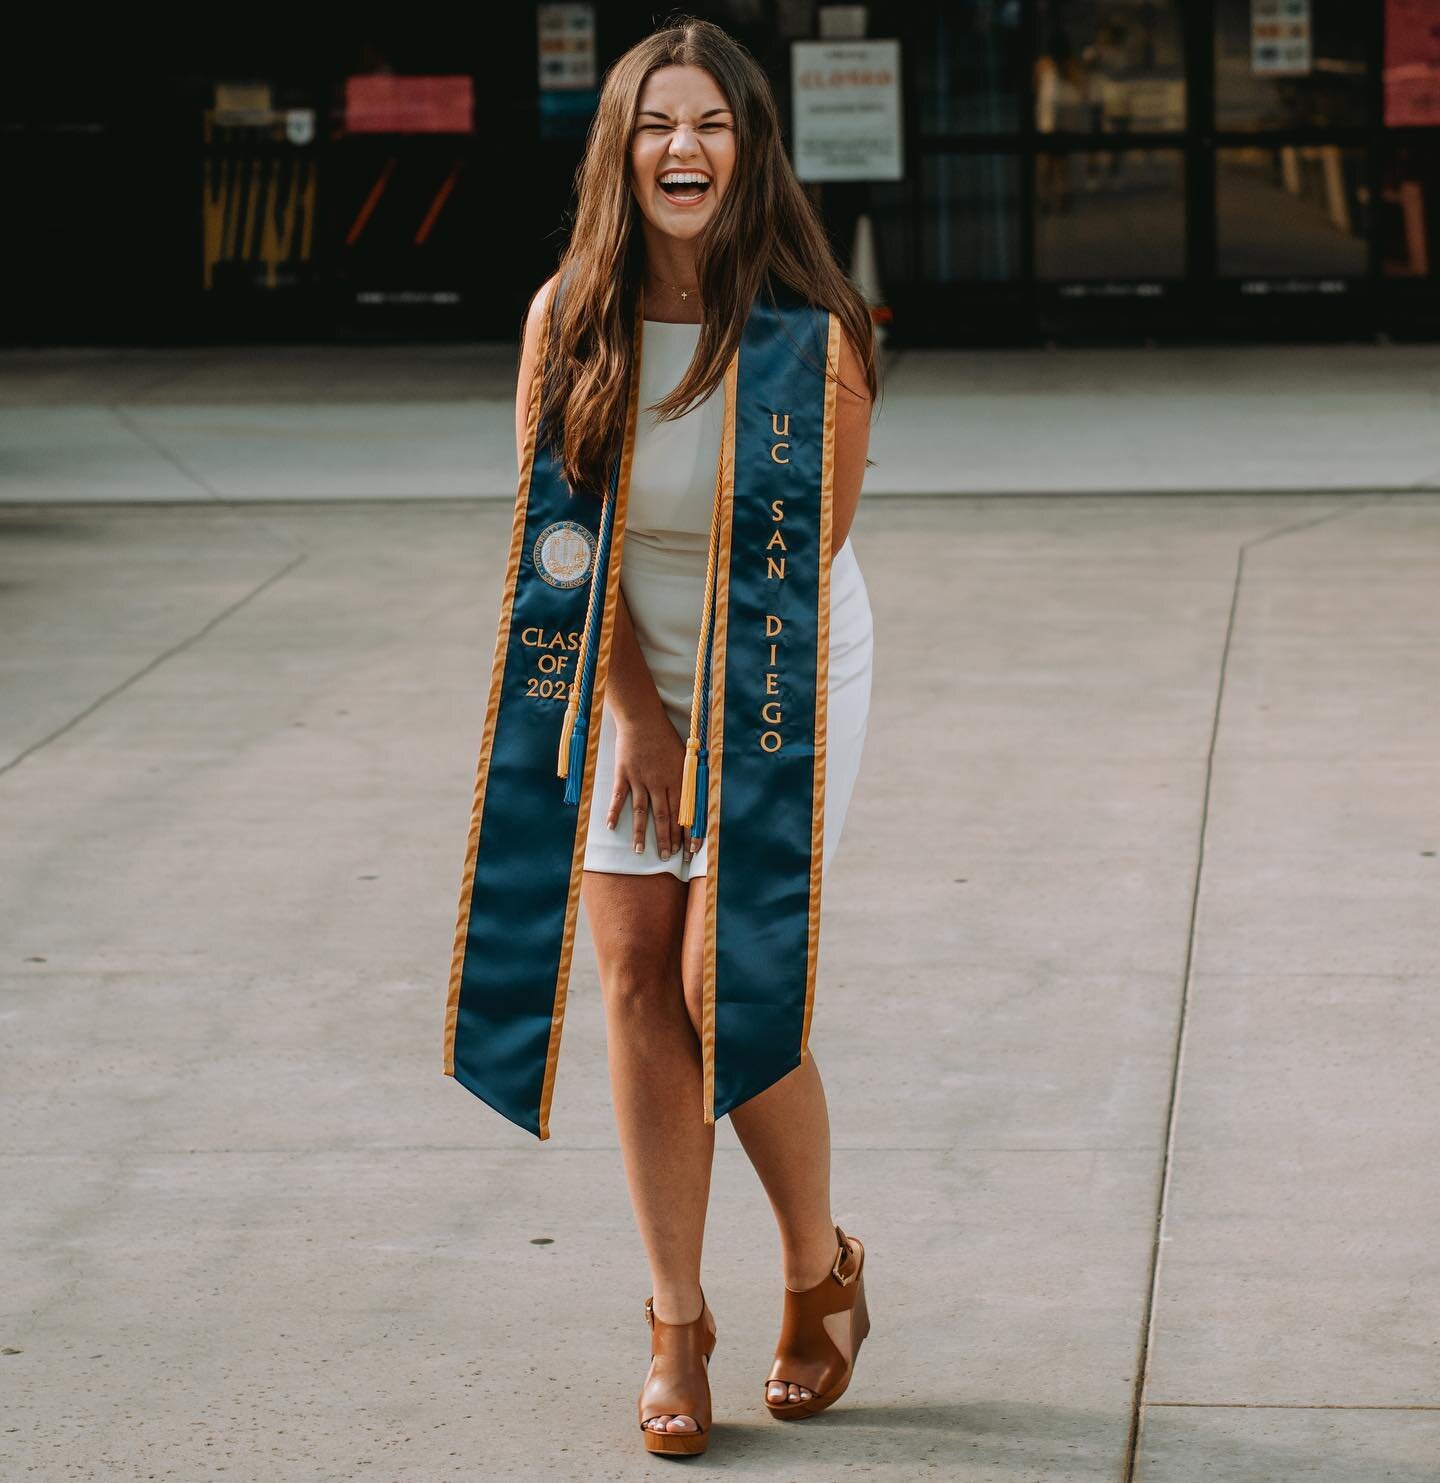 You Becker believe it 🎓

As a first generation college student, I&rsquo;m honored to have graduated magna cum laude from the University of California, San Diego (UCSD) in Eleanor Roosevelt College (ERC) with a Bachelor of Arts in communication and t